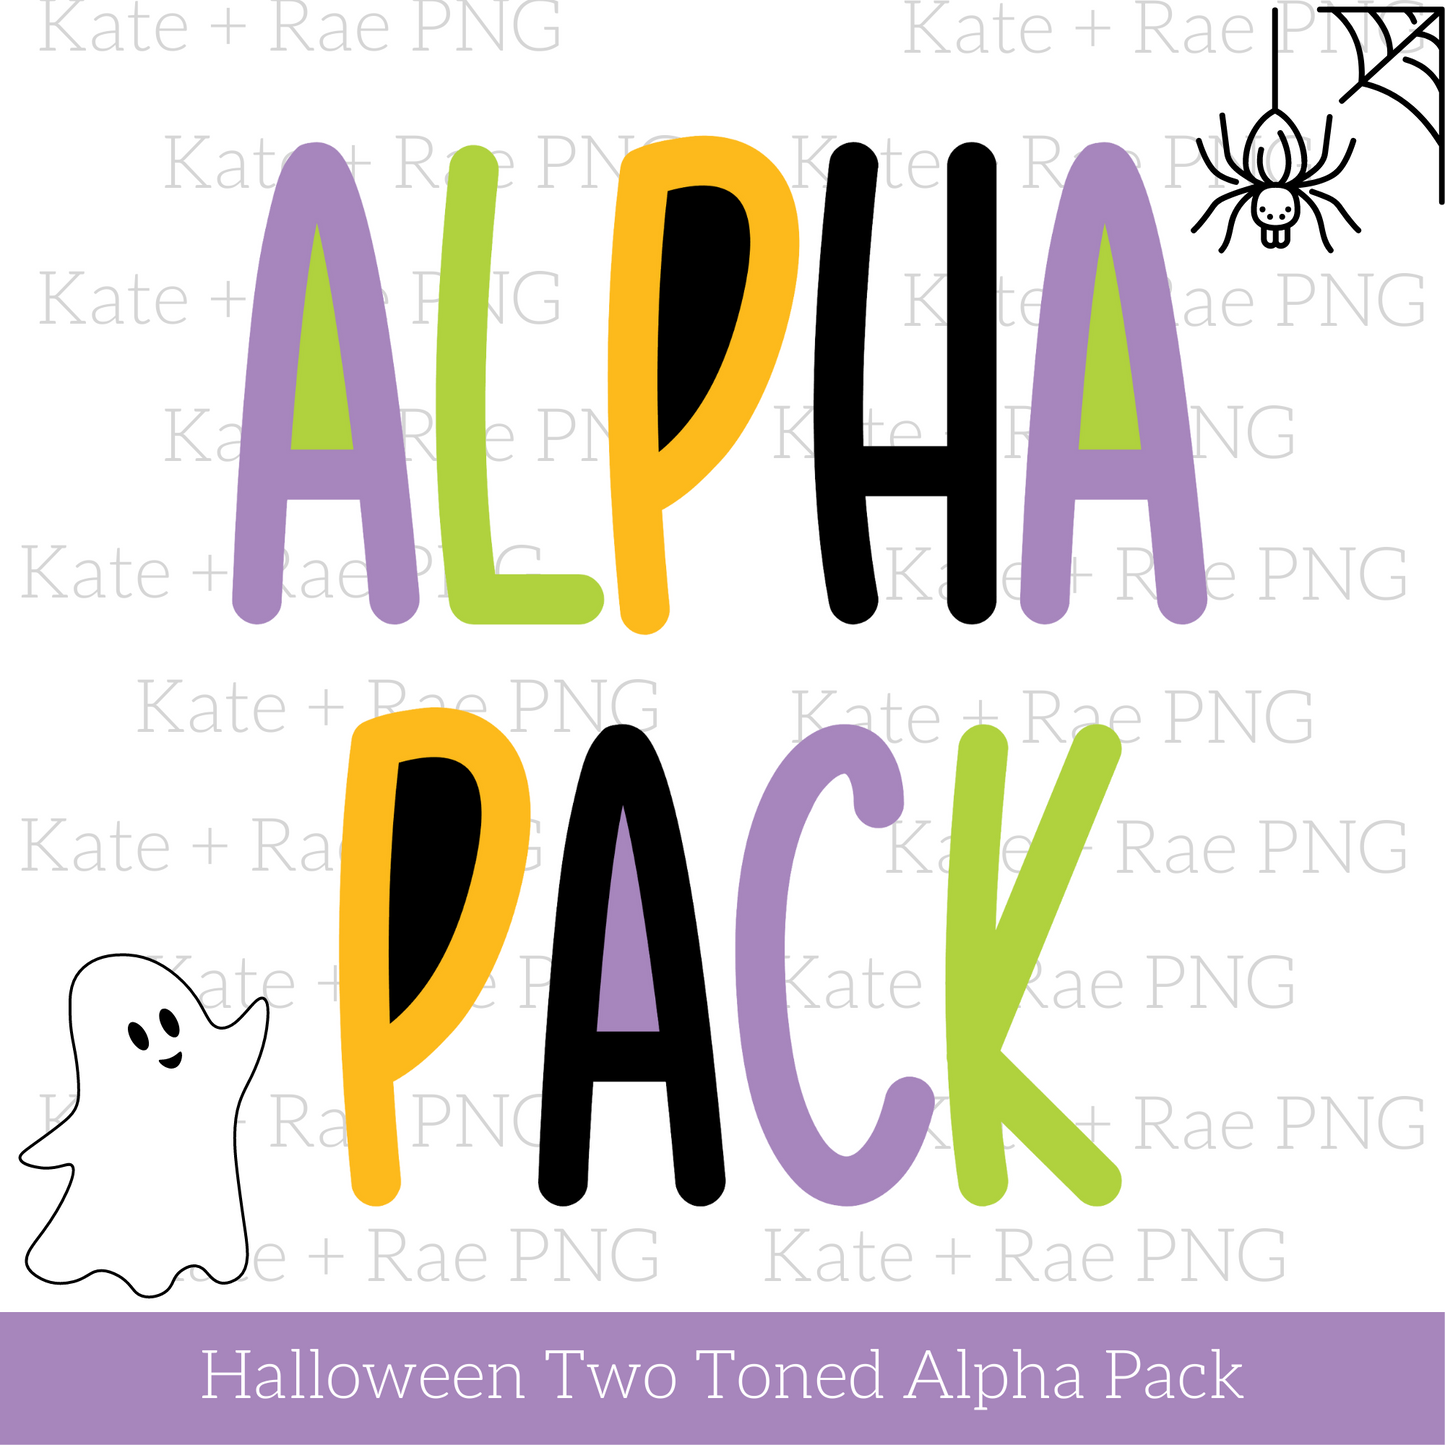 Halloween Two Toned Alpha Pack